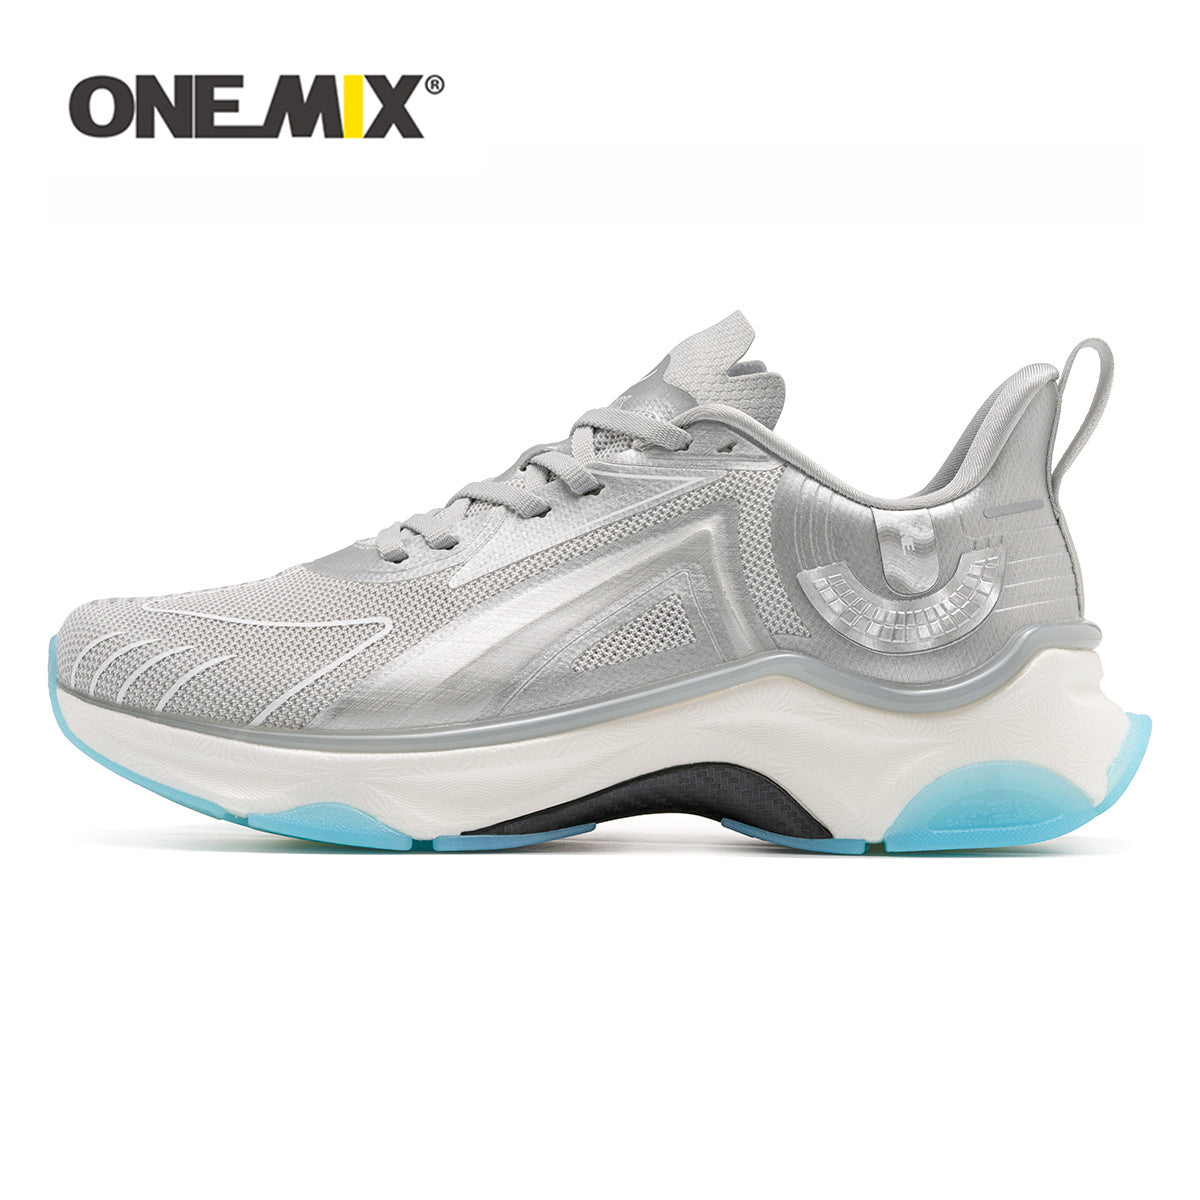 ONEMIX Breathable Lightweight Double-Structure Shock Absorber Race Running Shoes - Plantar Fasciitis Pain Relief